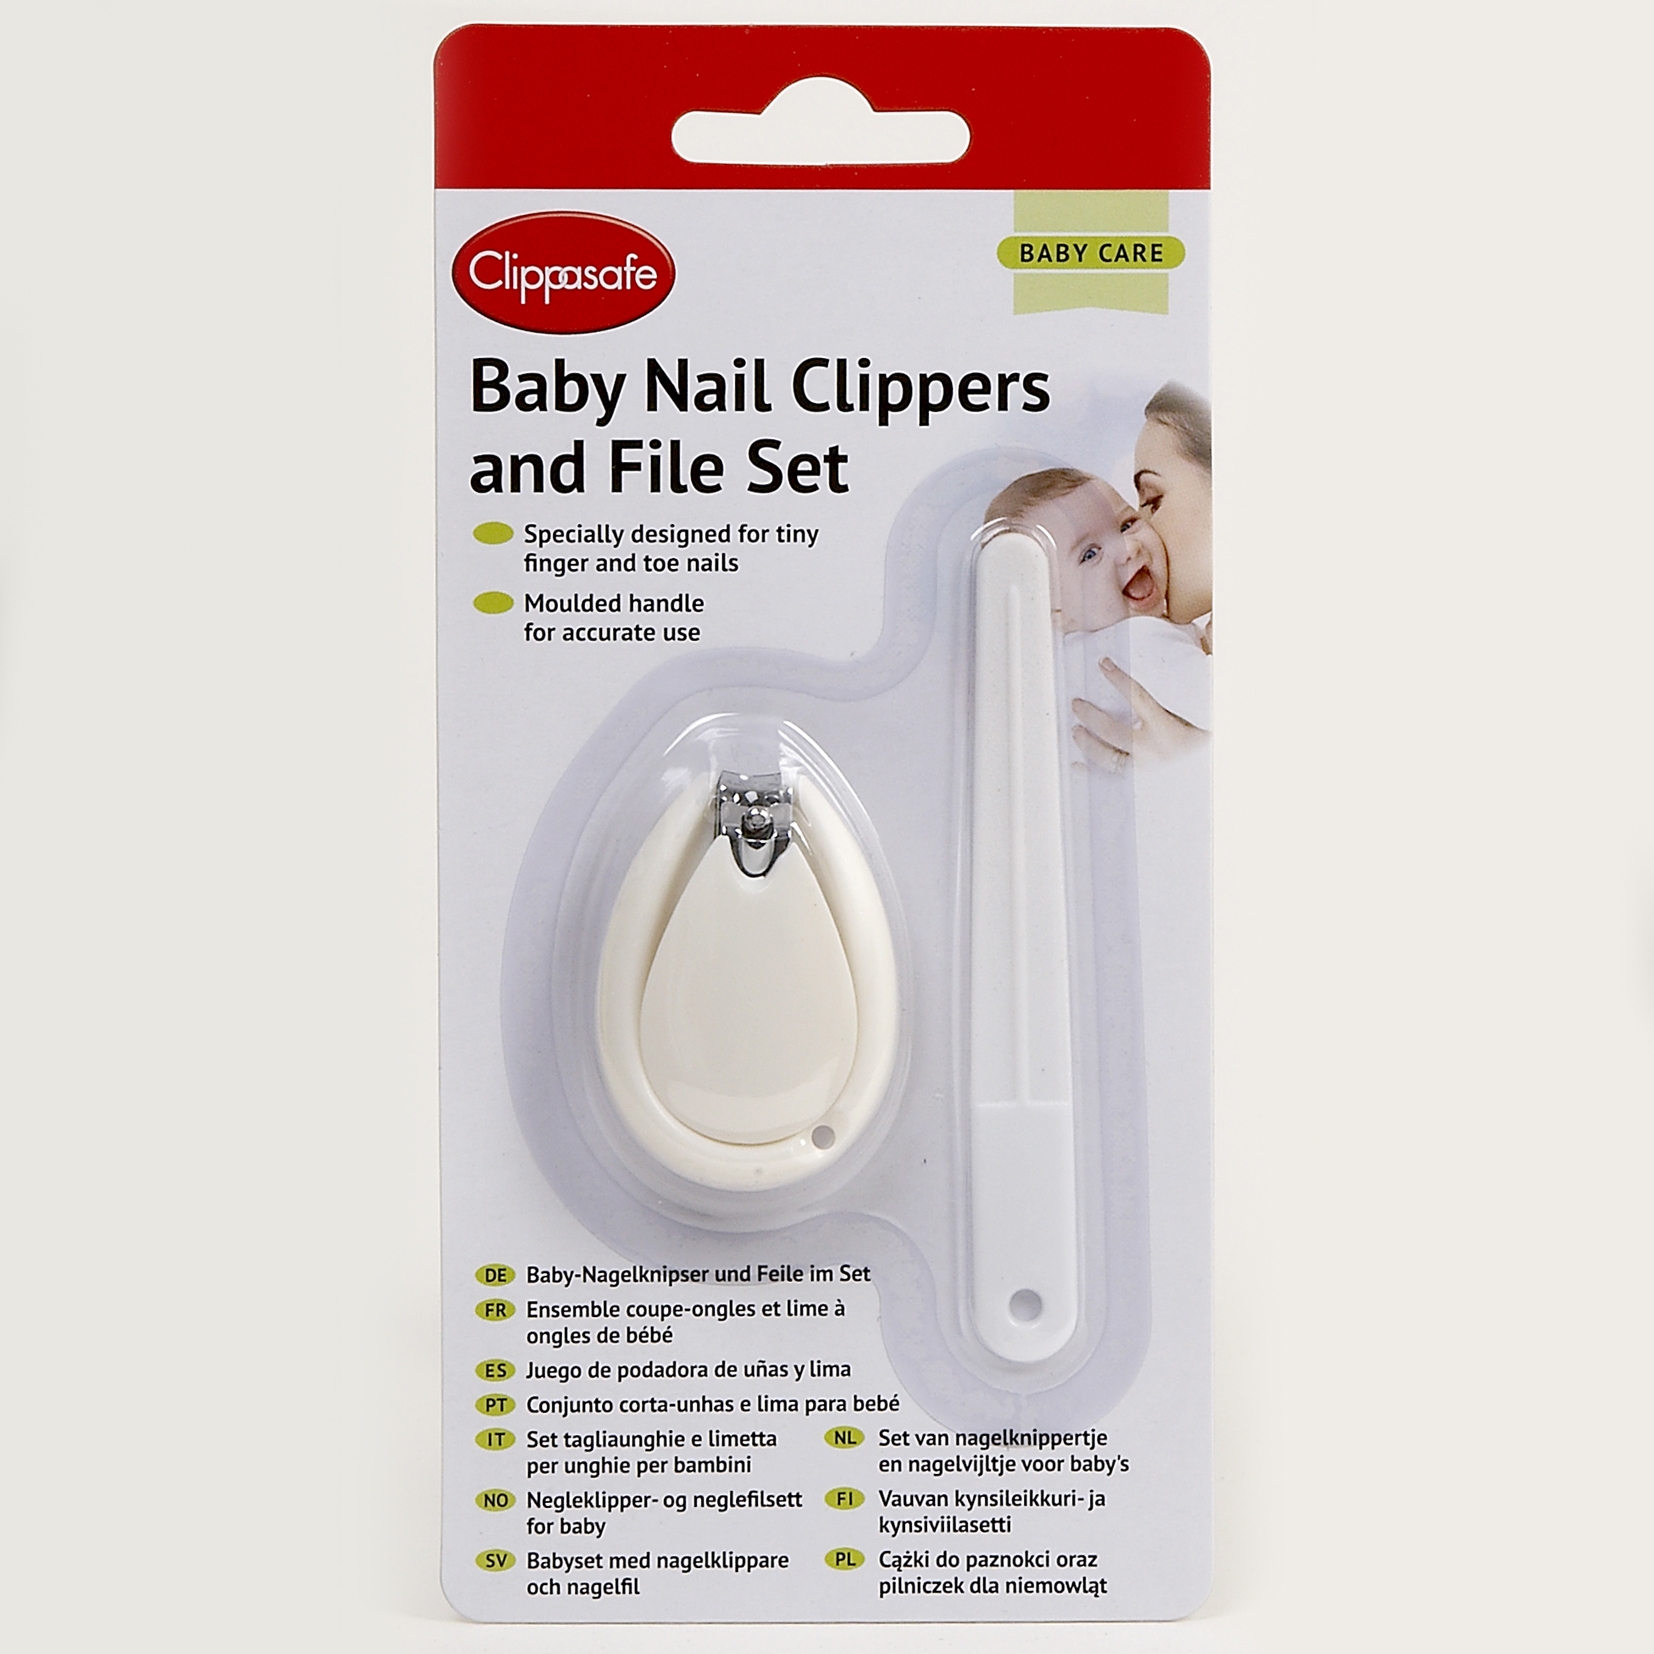 Clippasafe Baby Nail Clippers and File Set - White from Olivers Baby Care